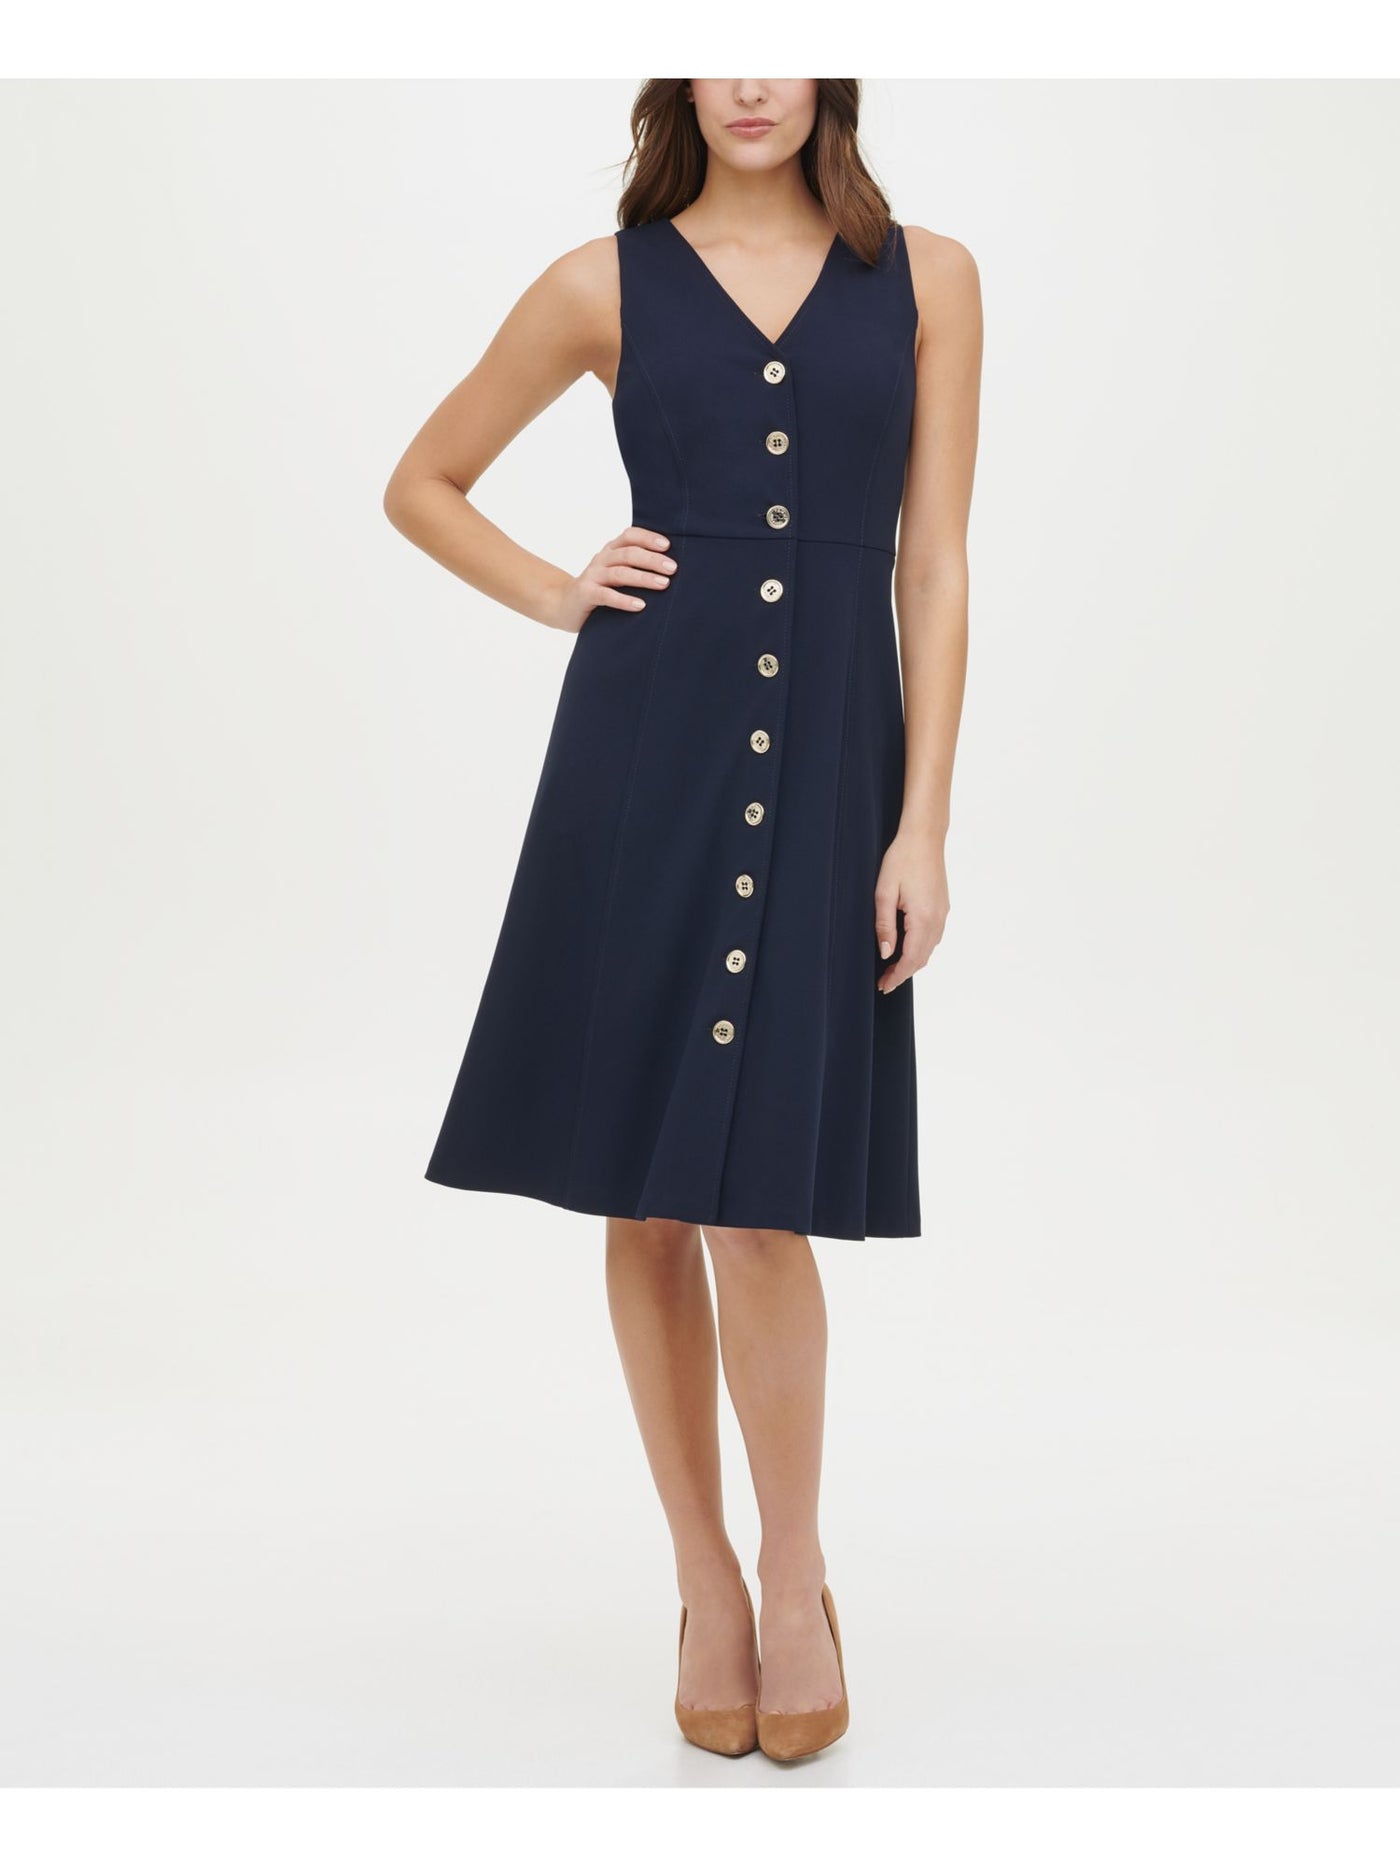 TOMMY HILFIGER Womens Navy Stretch Zippered Button-front Sleeveless V Neck Knee Length Wear To Work Fit + Flare Dress 16